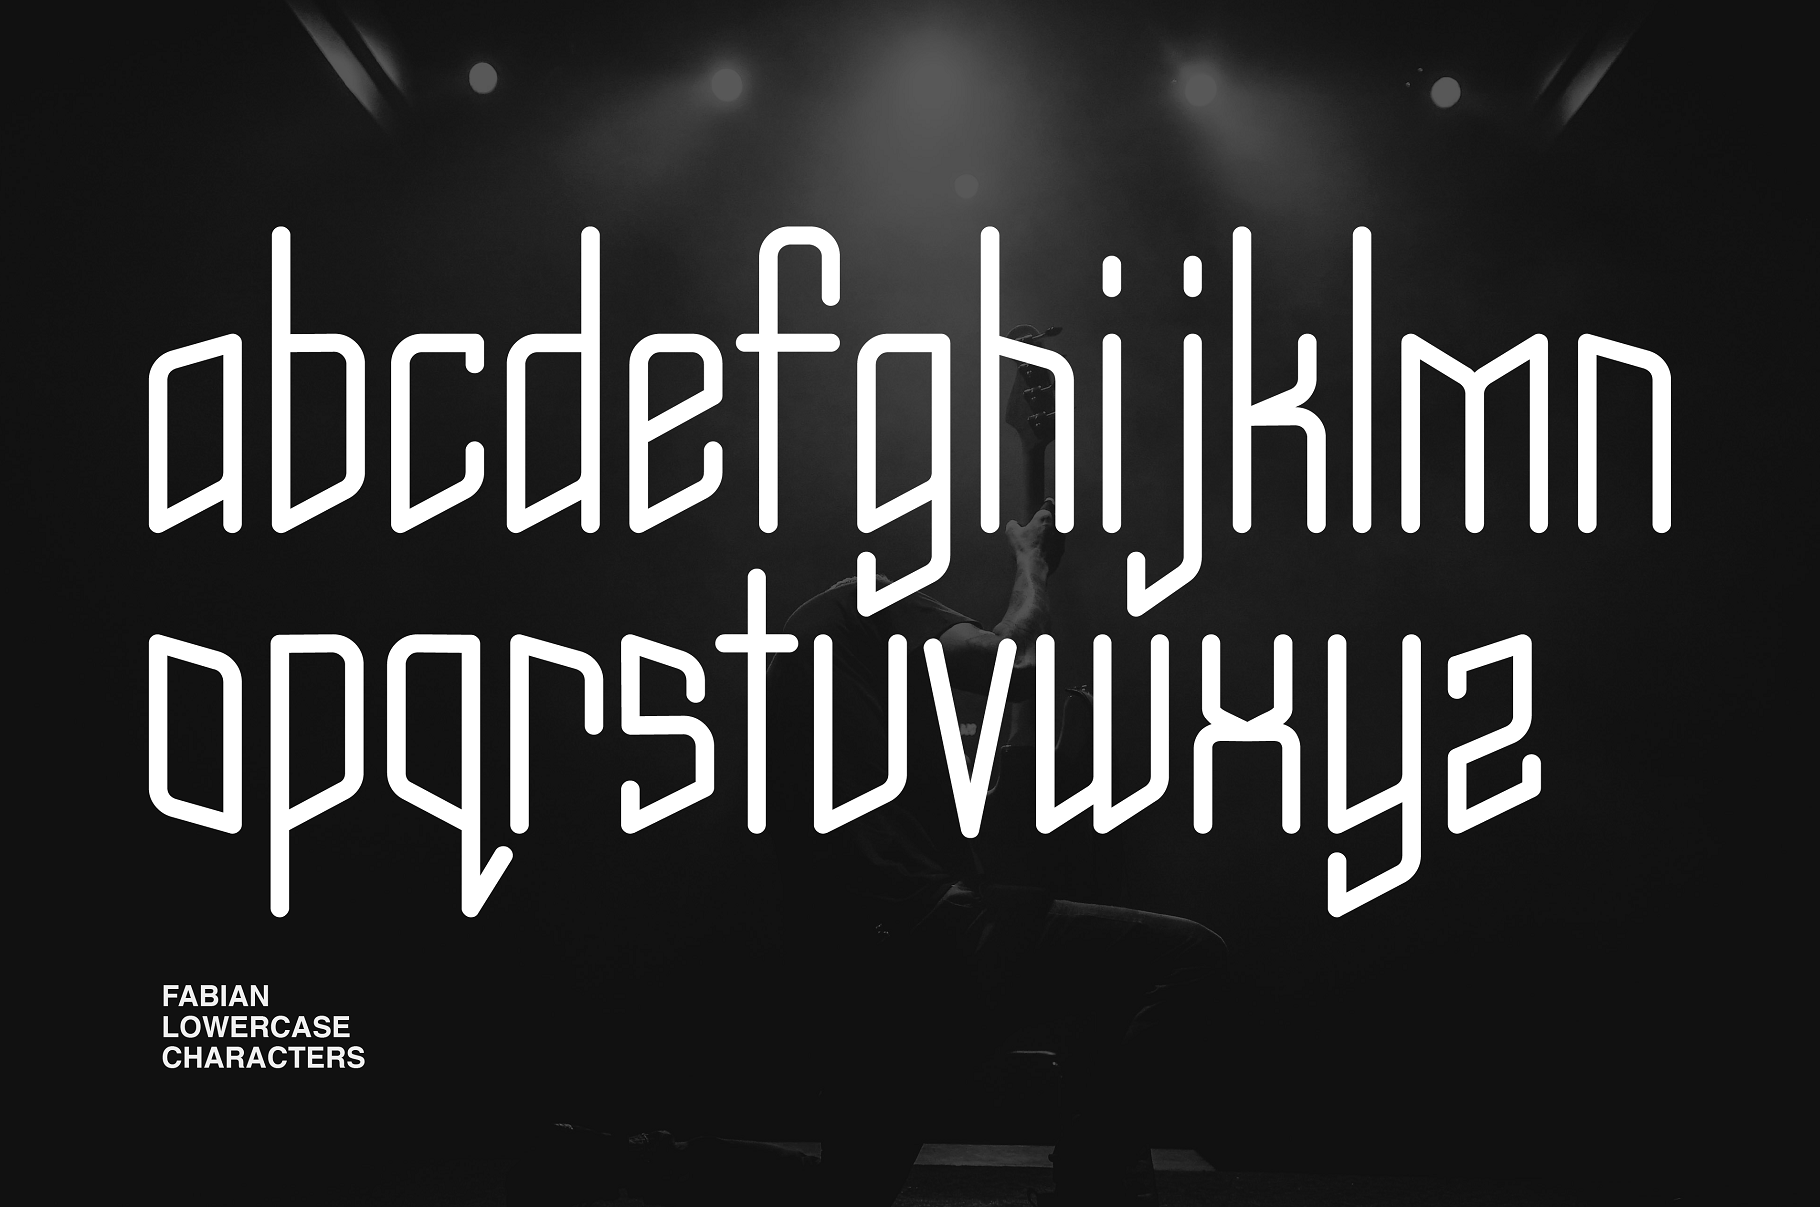 Fabian - Edgy Punk Display by hipfonts on Dribbble